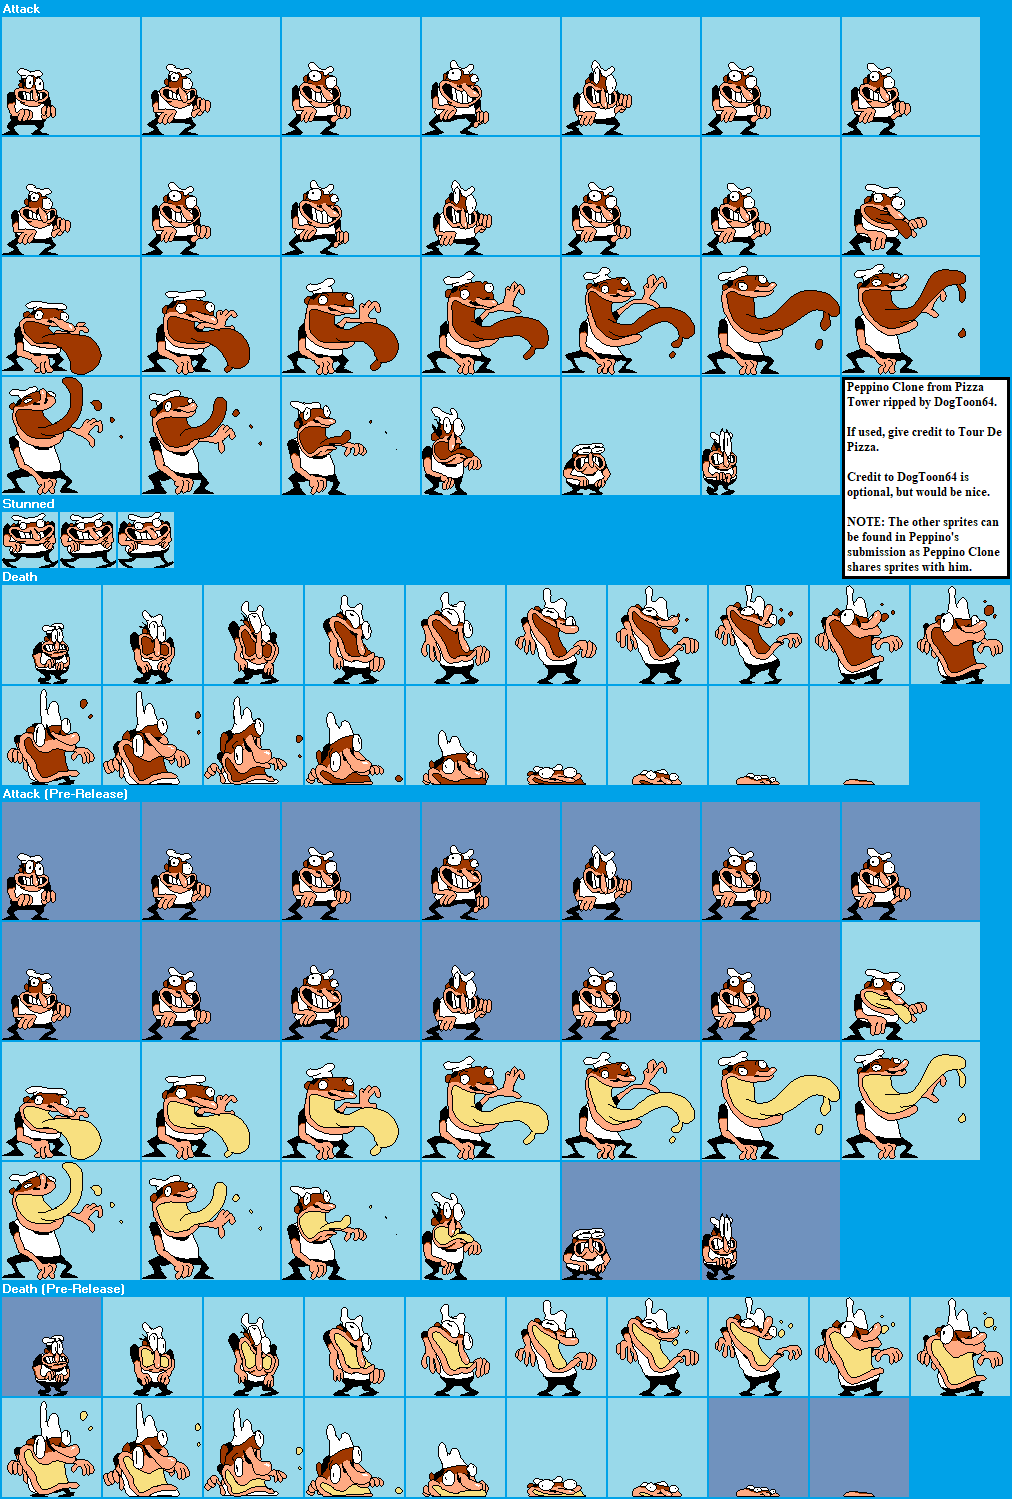 Making Peppino sprites, but every day I increase the amount of